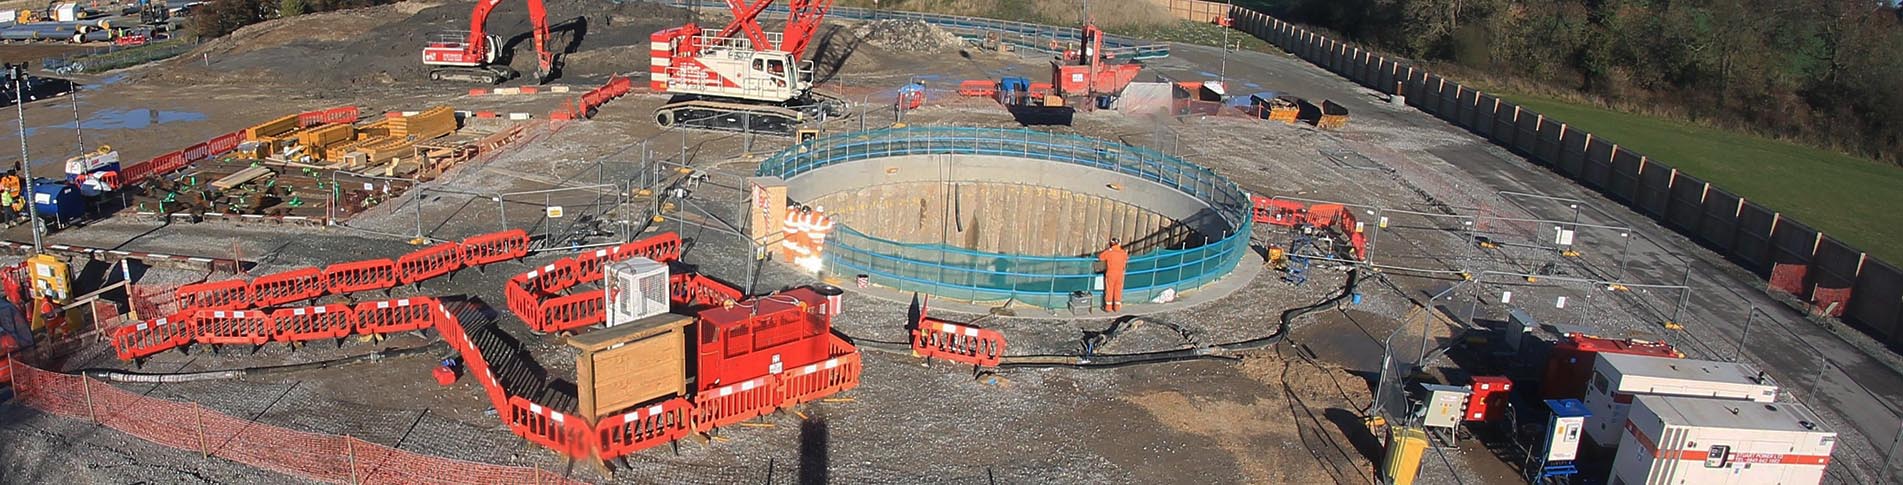 dewatering systems | Stuart Wells Limited